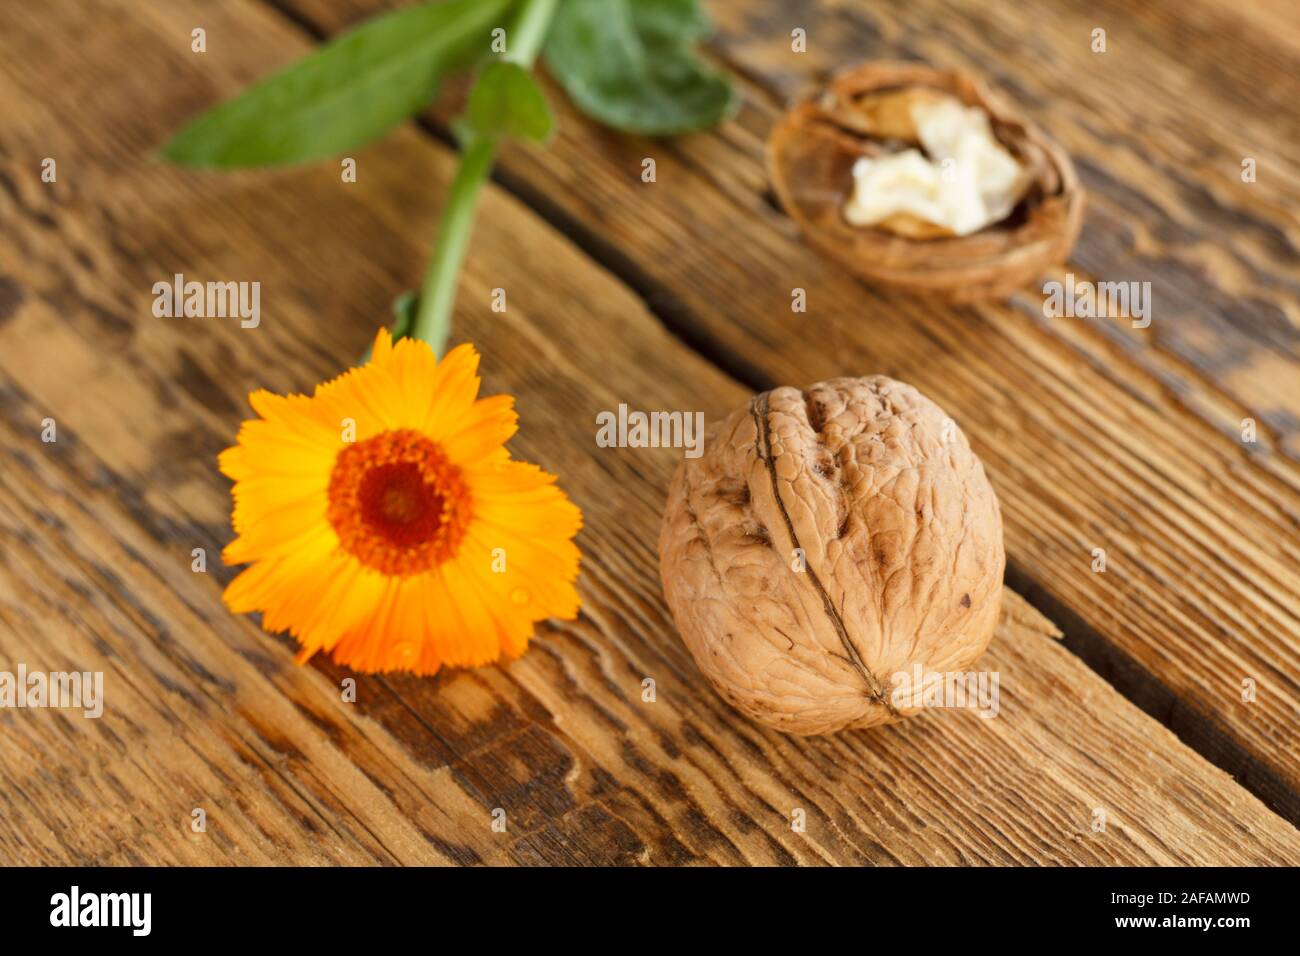 Close-up walnuts and calendula flower on wooden background. Shallow depth of field. Stock Photo